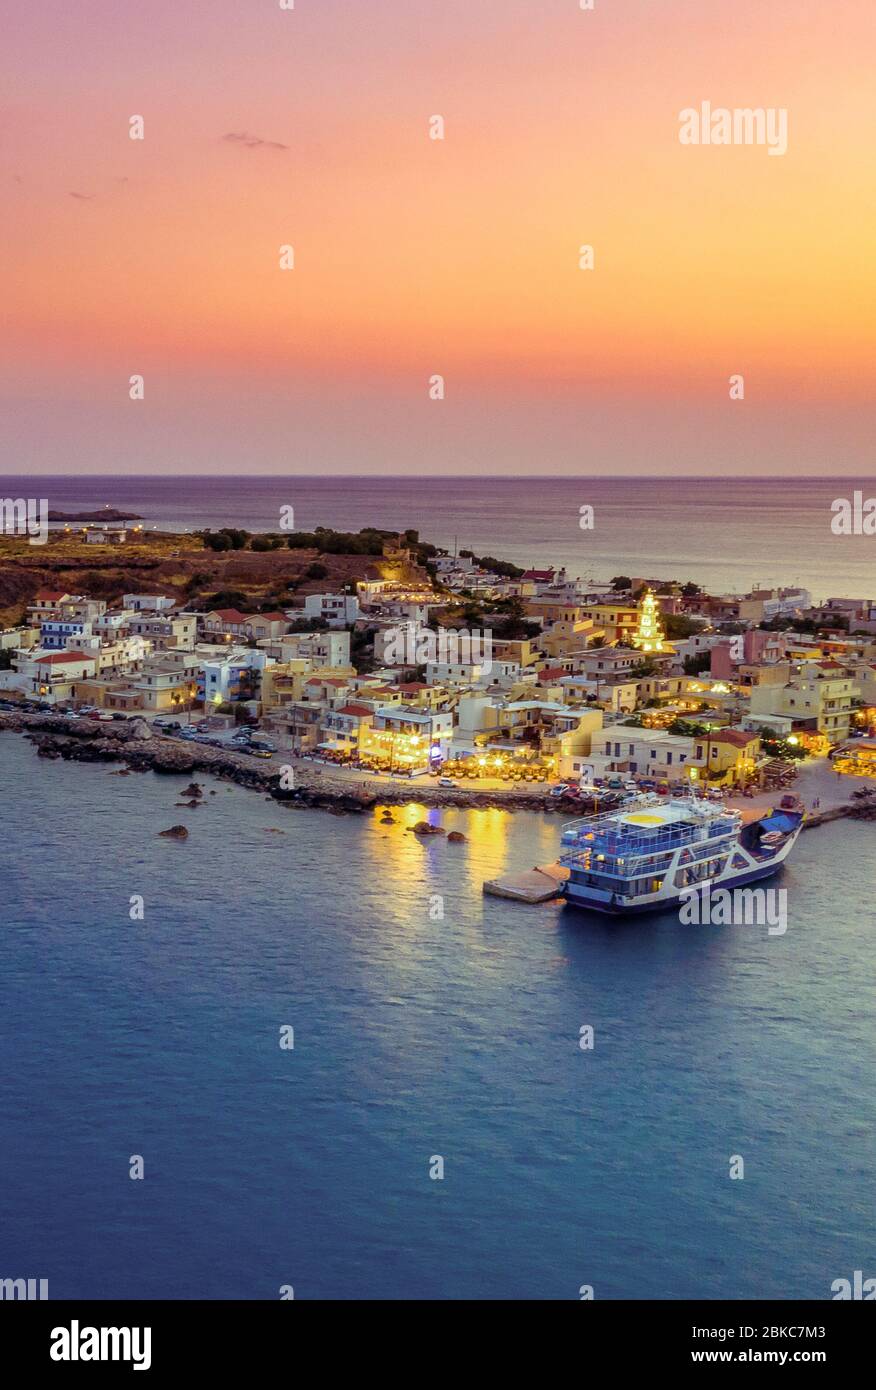 Aerial view of traditional village of Paleochora at sunset, Chania, Crete, Greece. Stock Photo